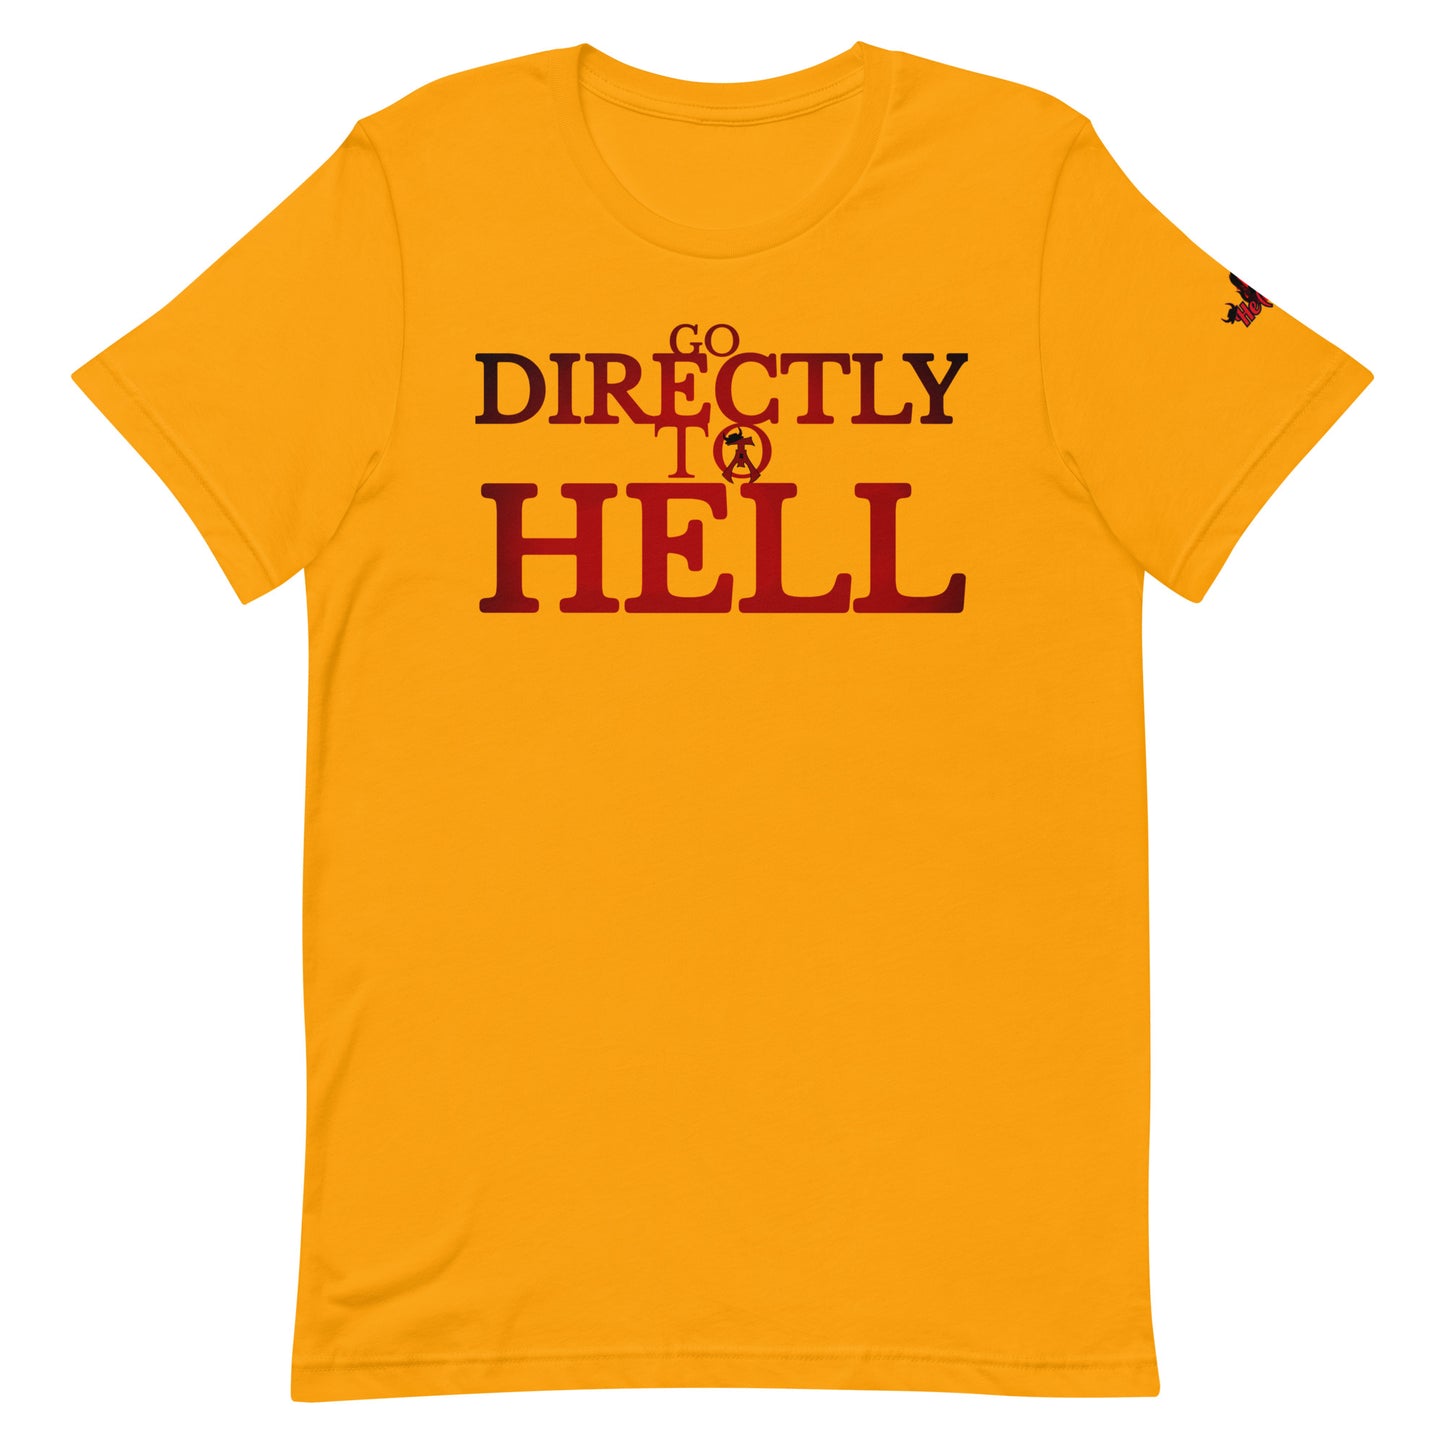 Go DIRECTLY To HELL Unisex t-shirt